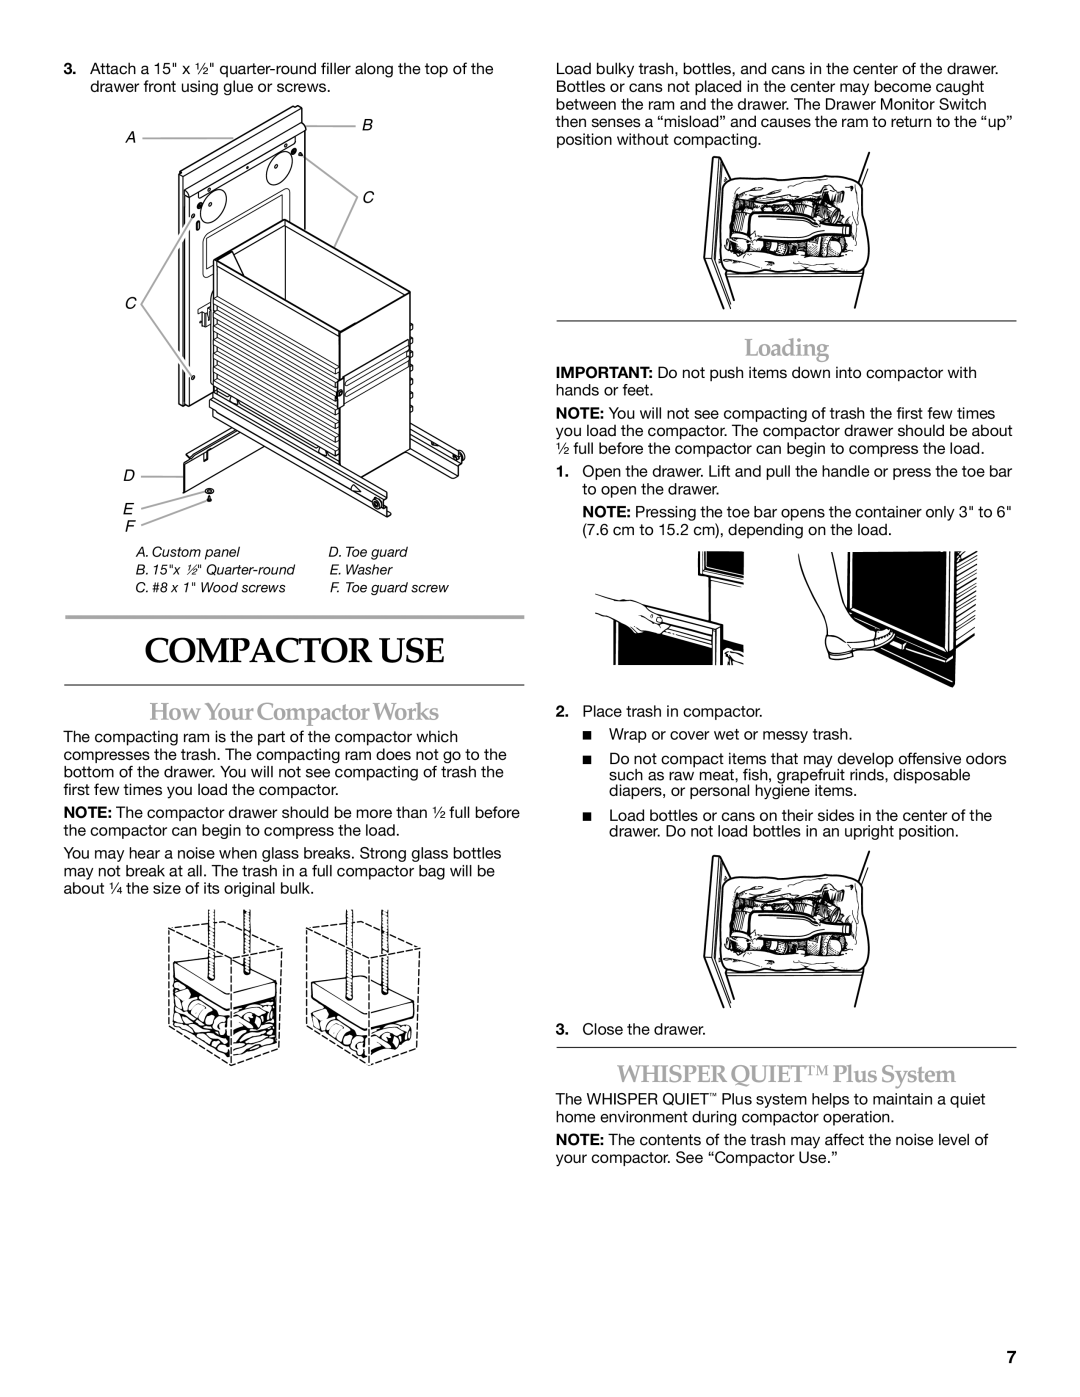 KitchenAid INTEGRATED COMPACTOR manual Compactor USE, Loading, How Your Compactor Works, Whisper Quiet PlusSystem 